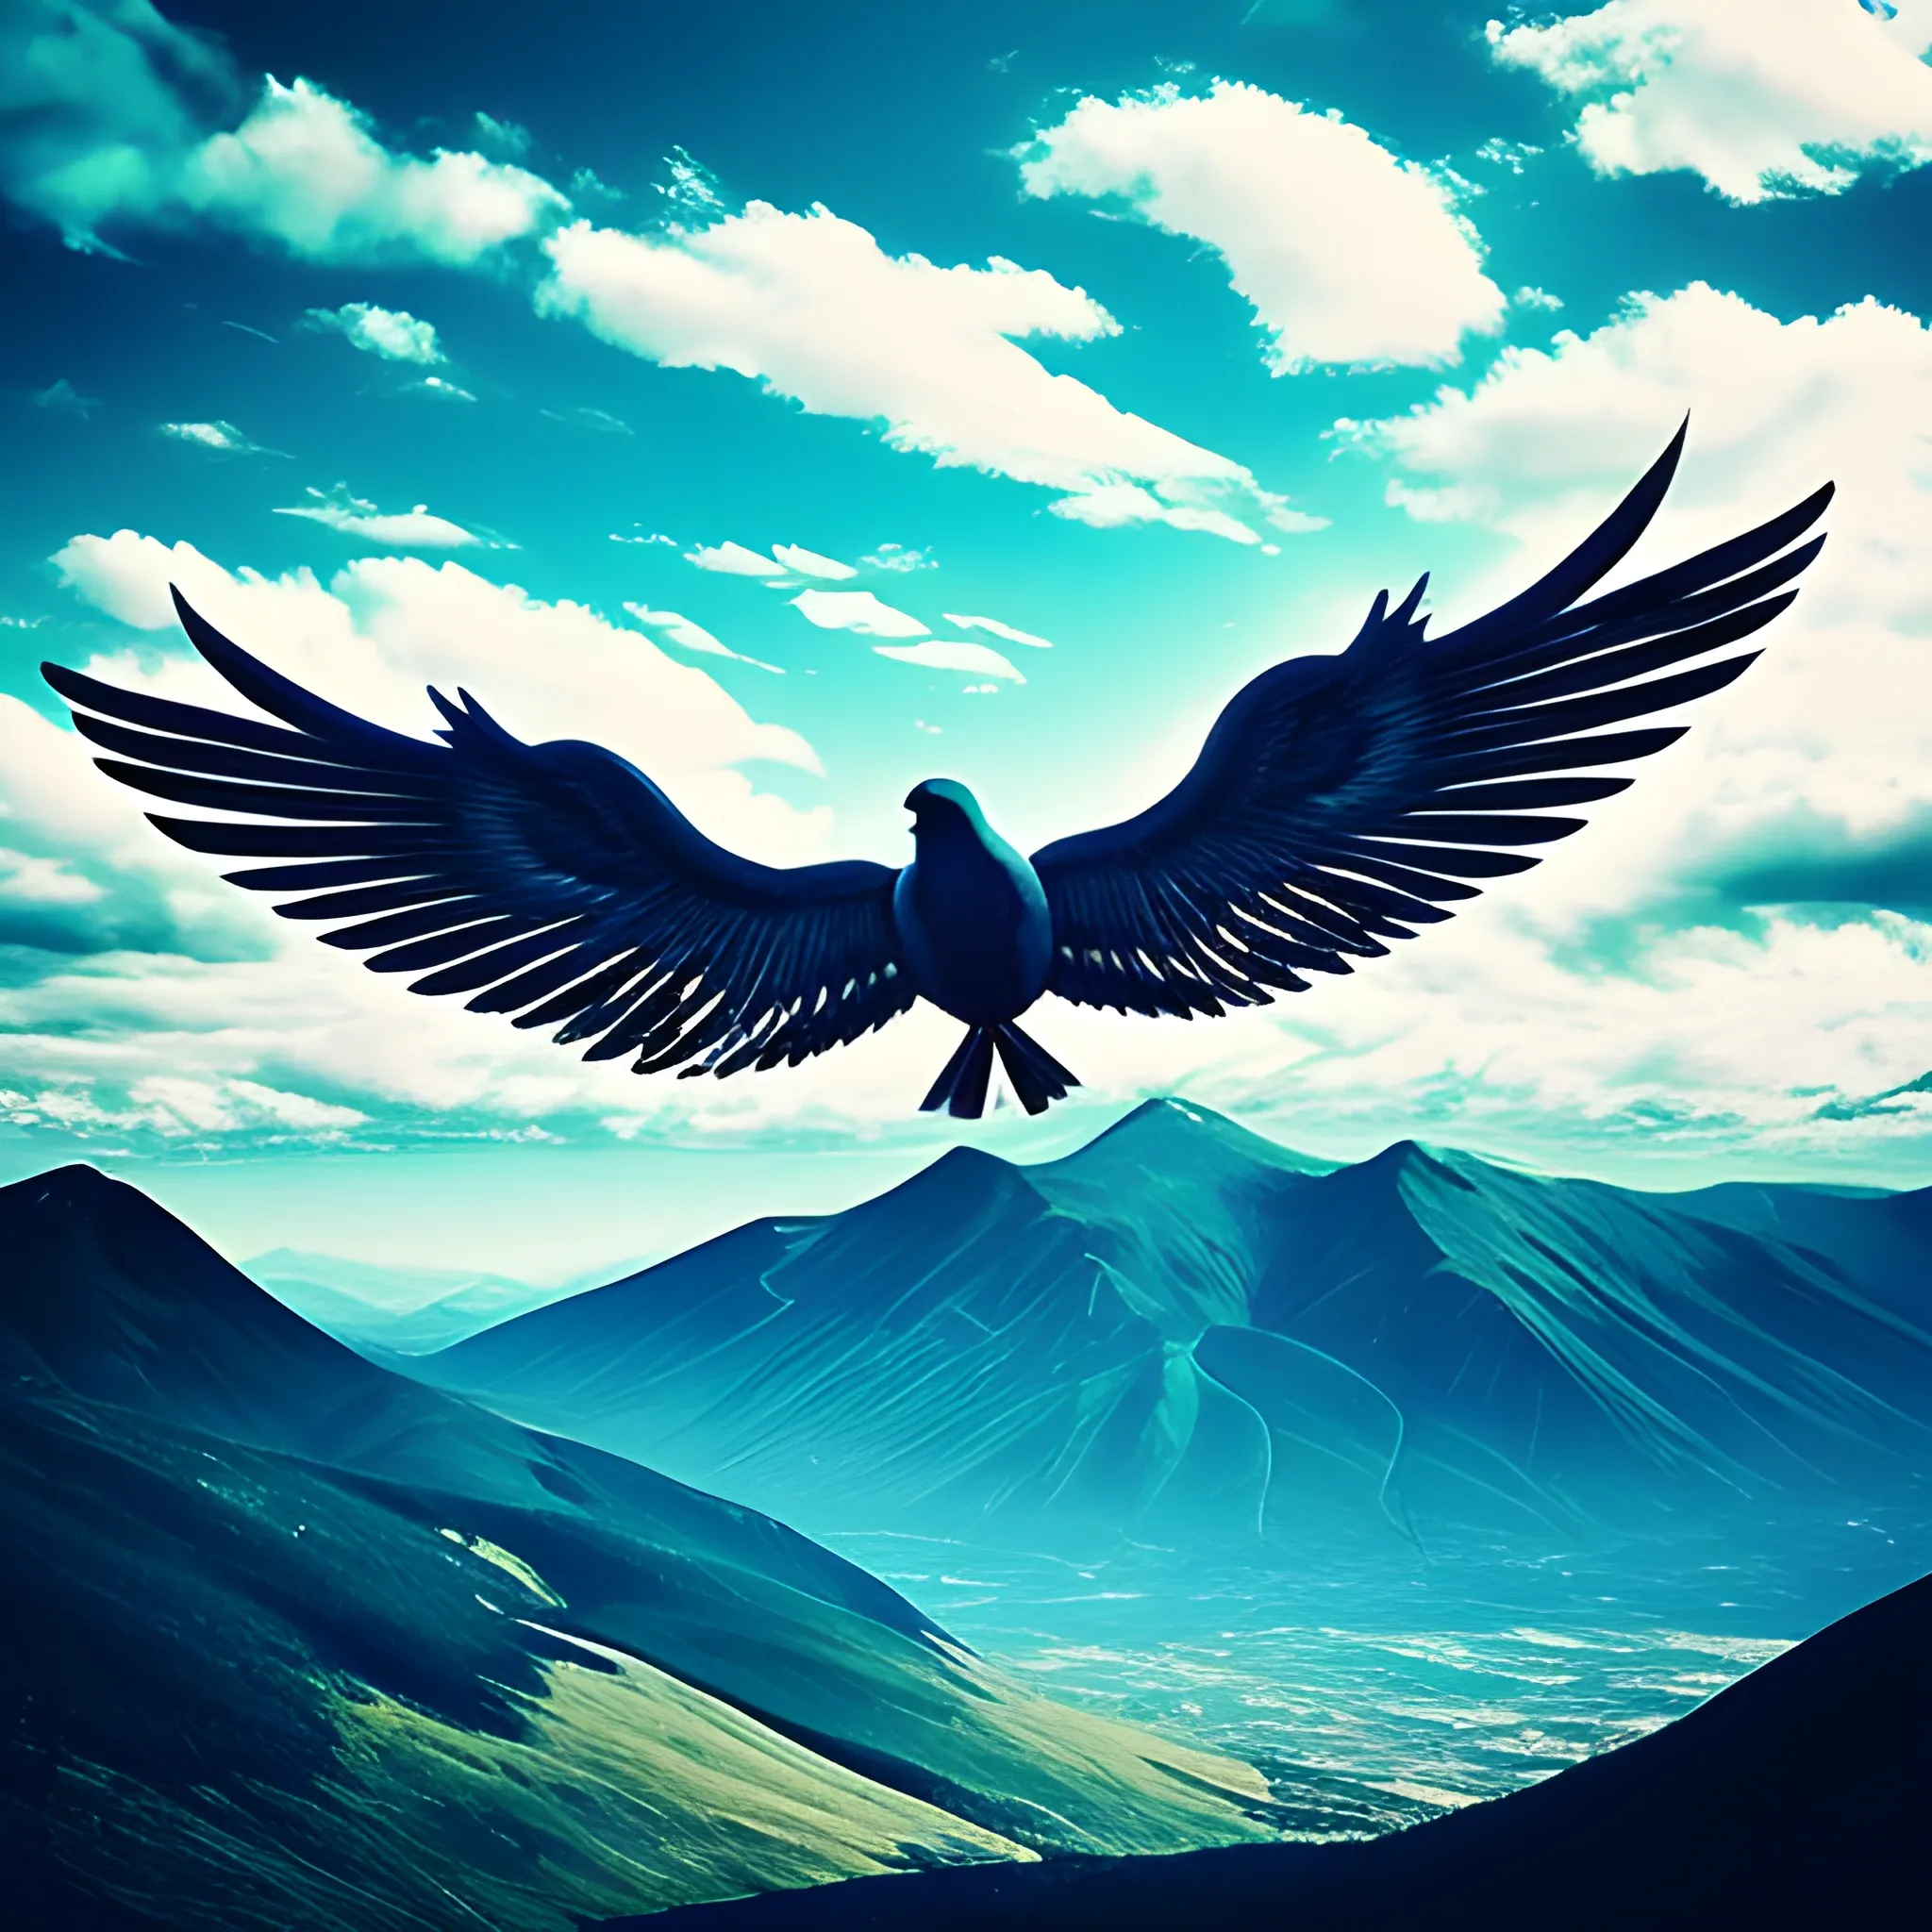 wings of bird . mountin landscape,
athmospher, clouds, Trippy,